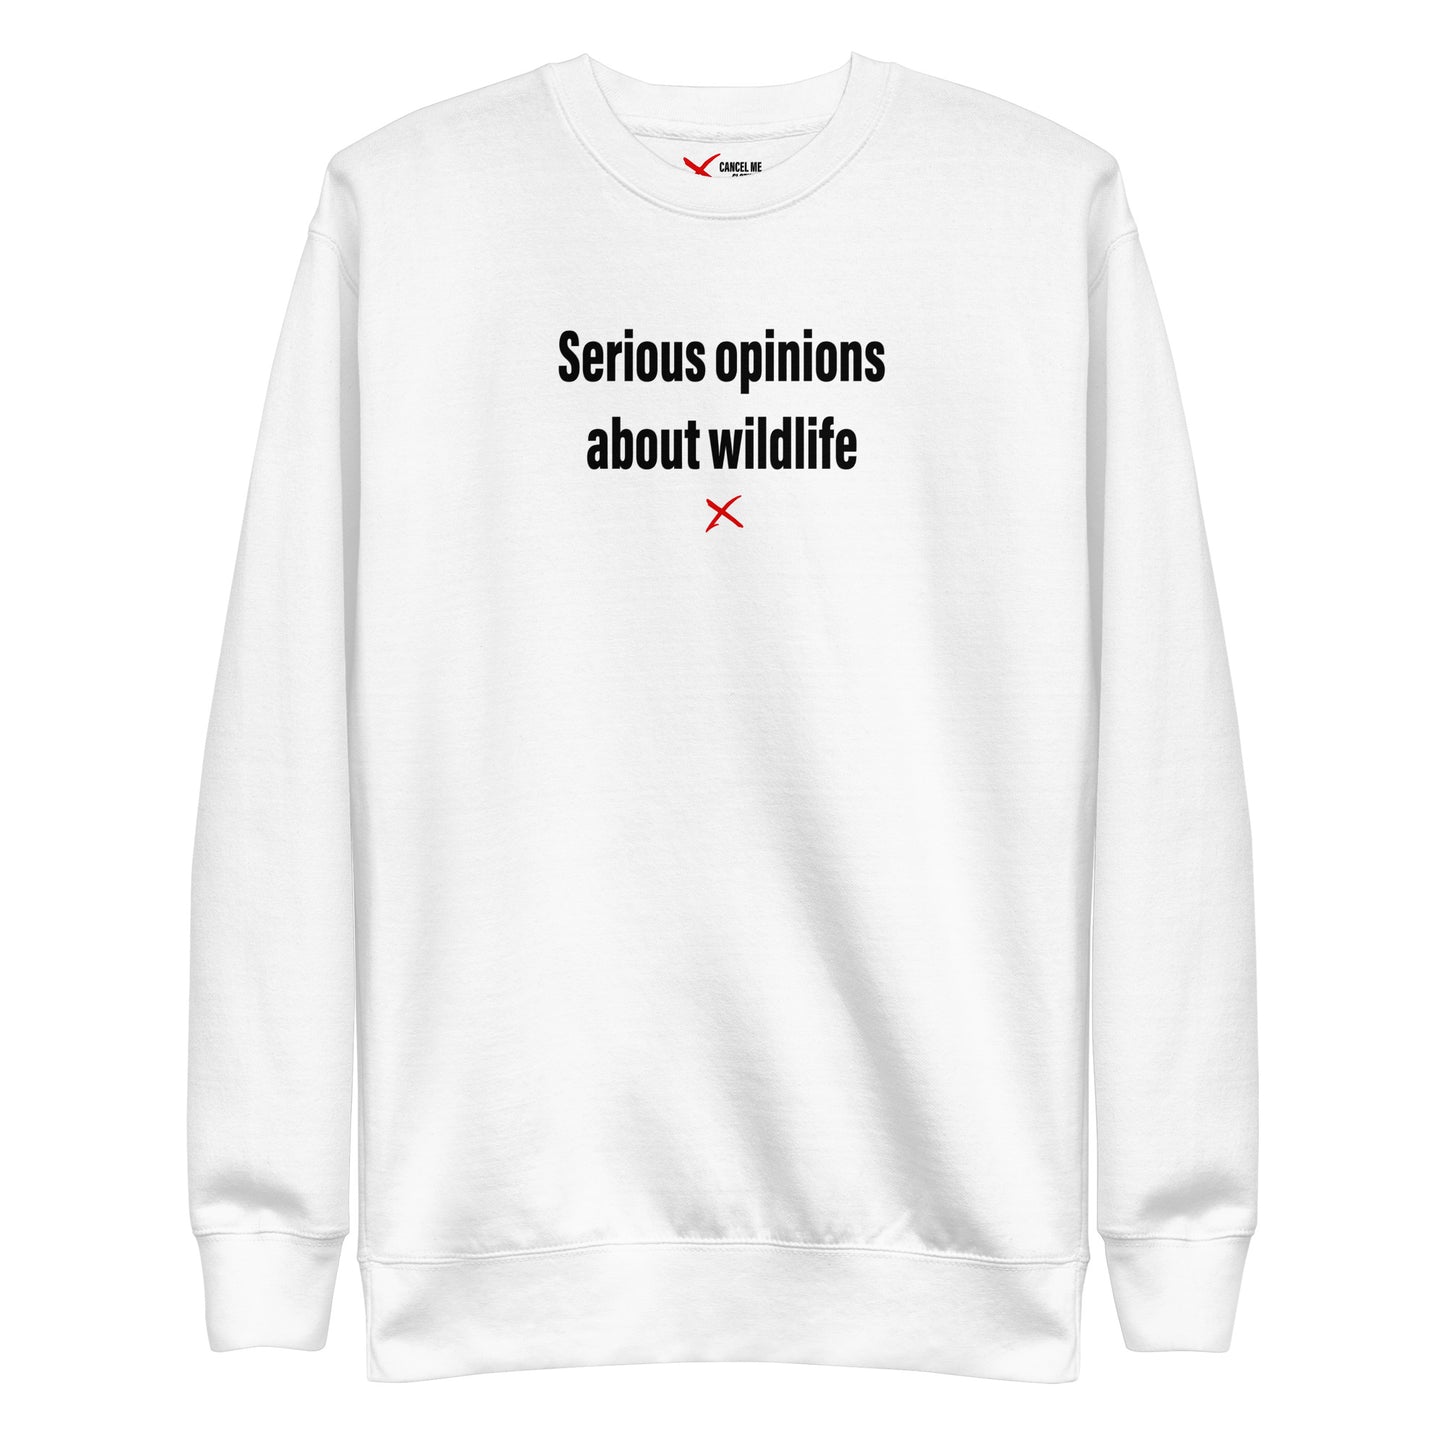 Serious opinions about wildlife - Sweatshirt